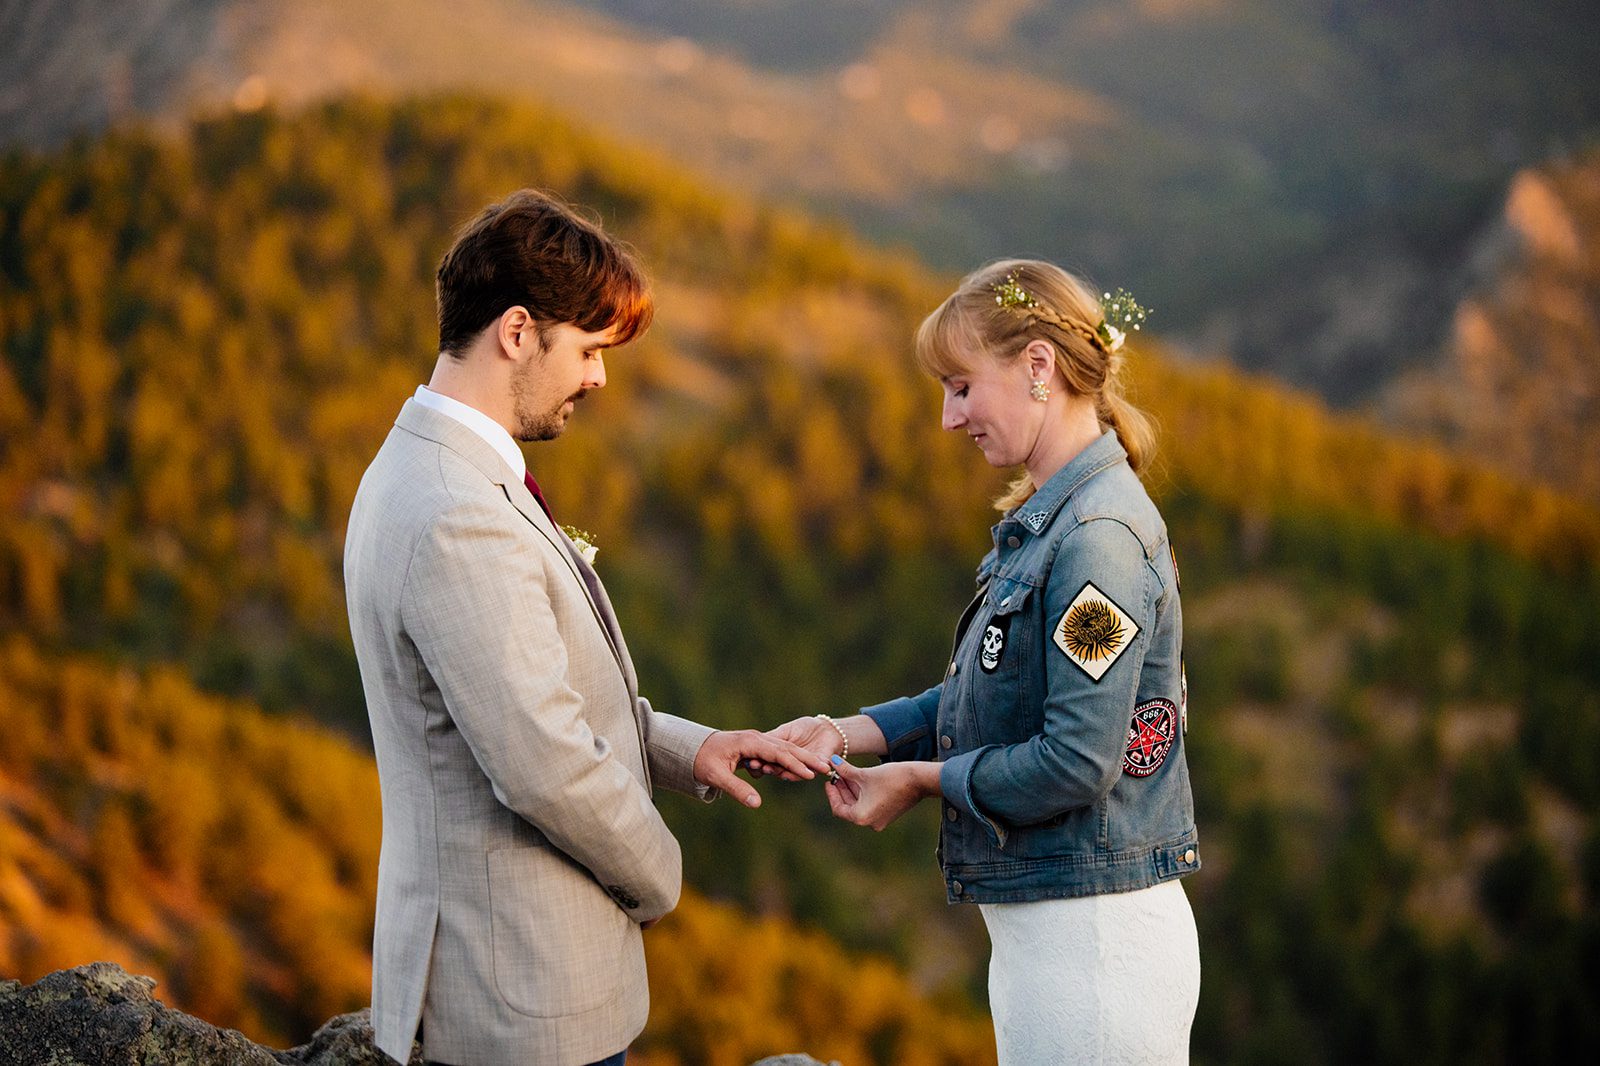 bride puts ring on grooms hand during sunrise ceremony at Lost Gulch Overlook in boulder, colorado